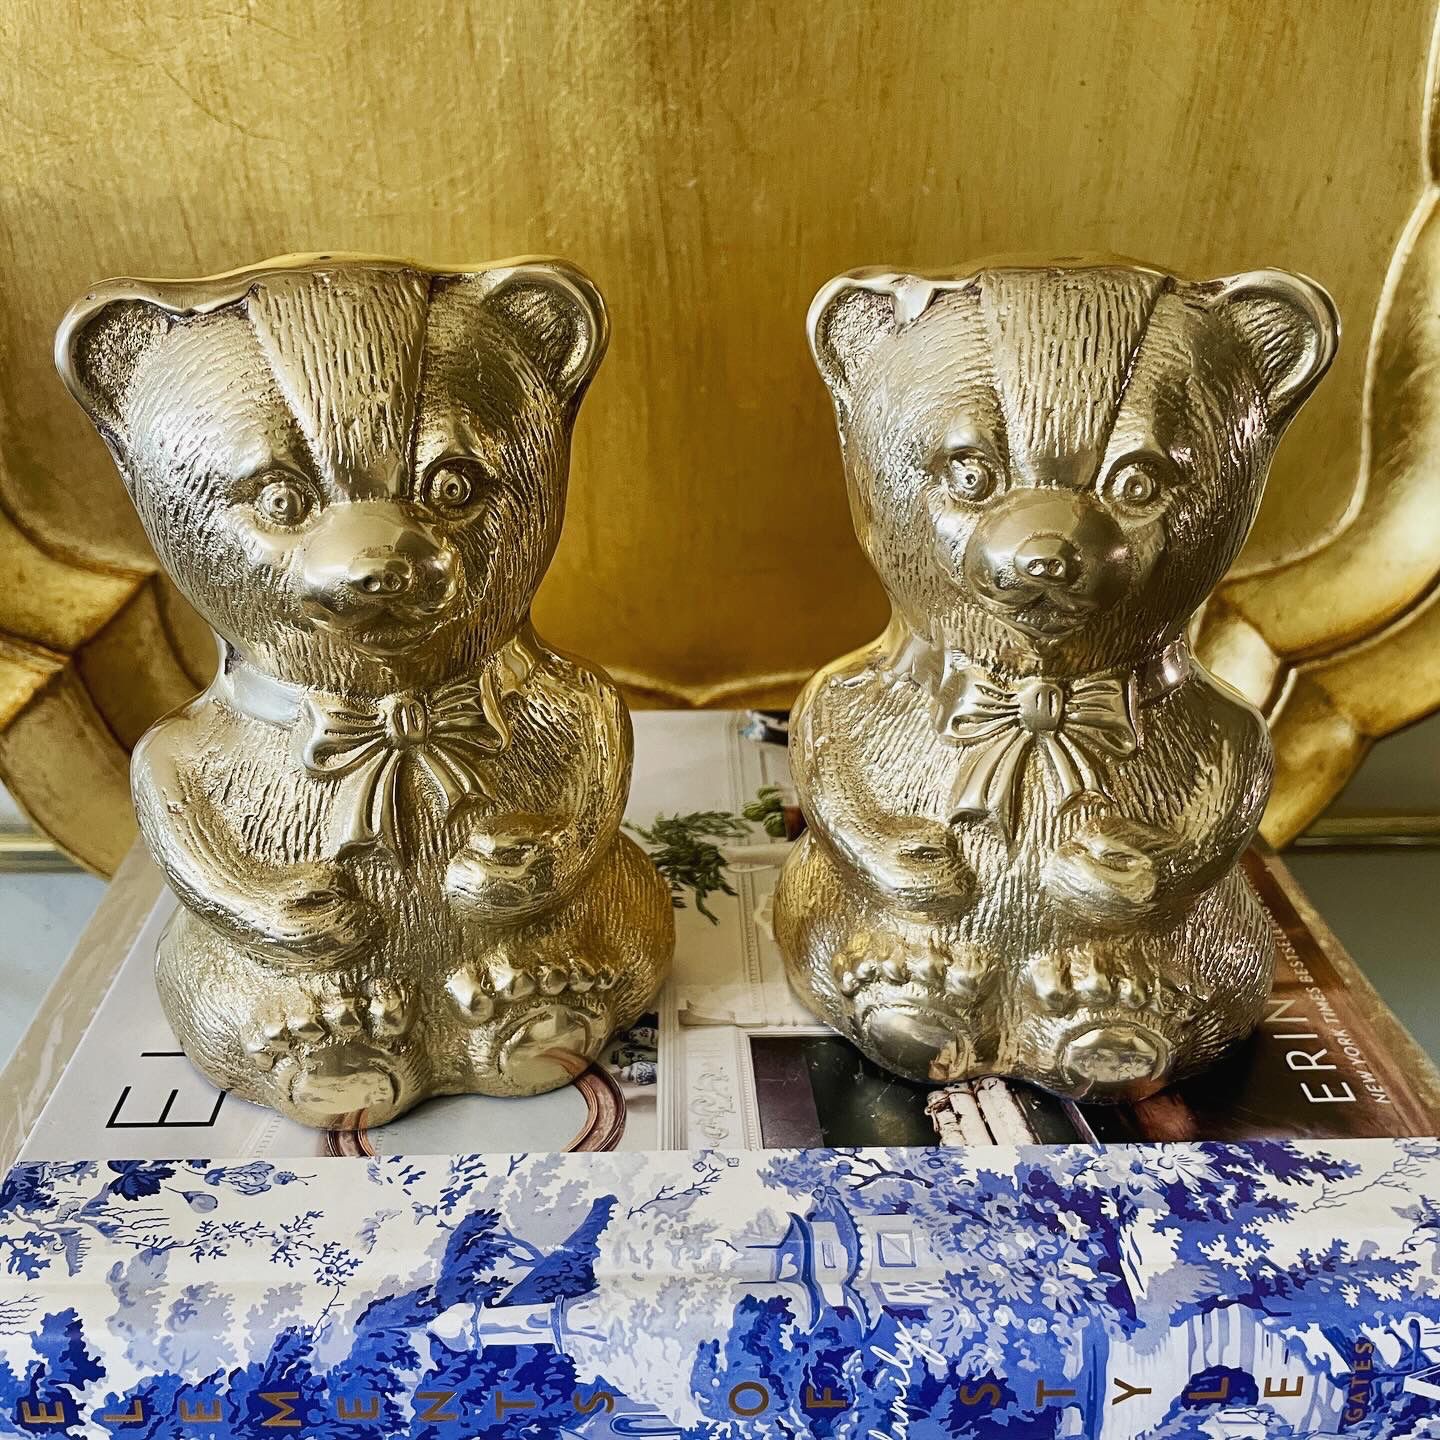 Vintage 5 1/2” H Heavy Solid Brass Teddy Bear Bookends - Pair